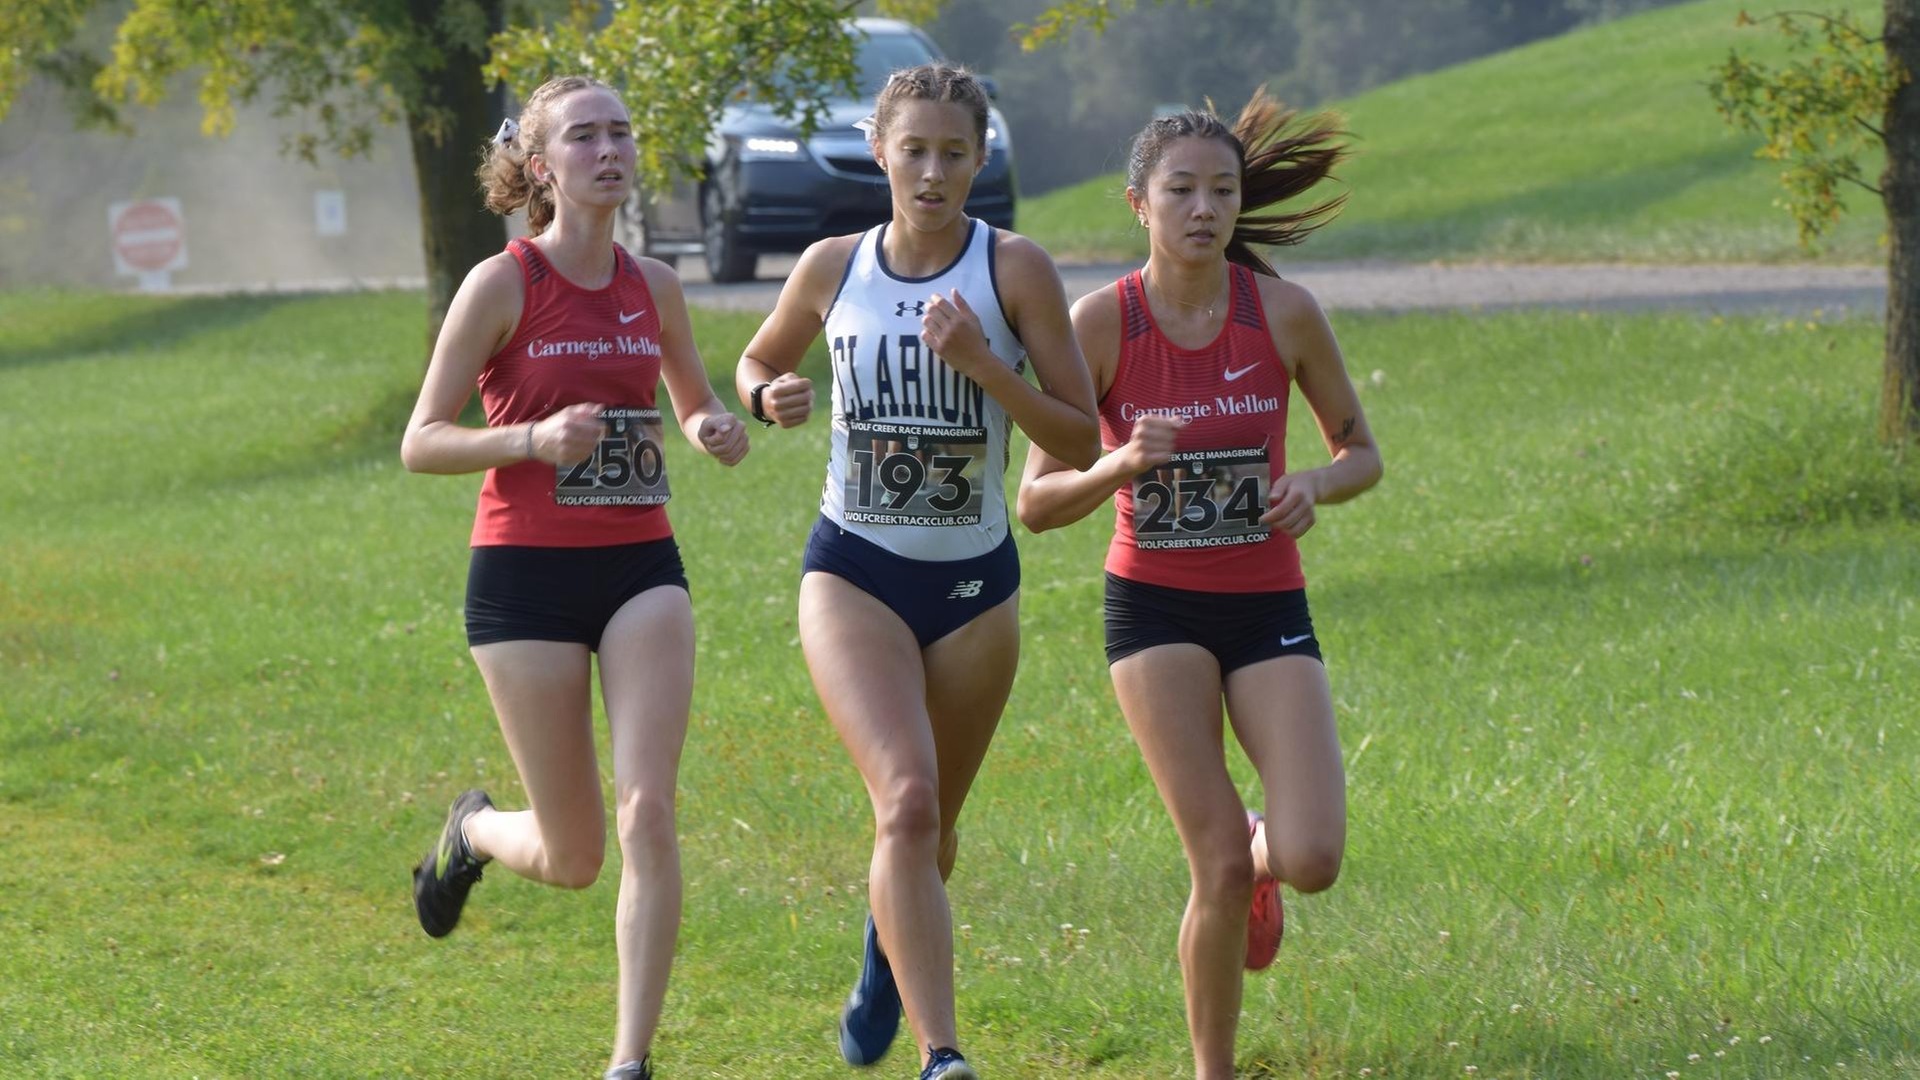 three women's cross country runners on a trail with green grass and a car in the background